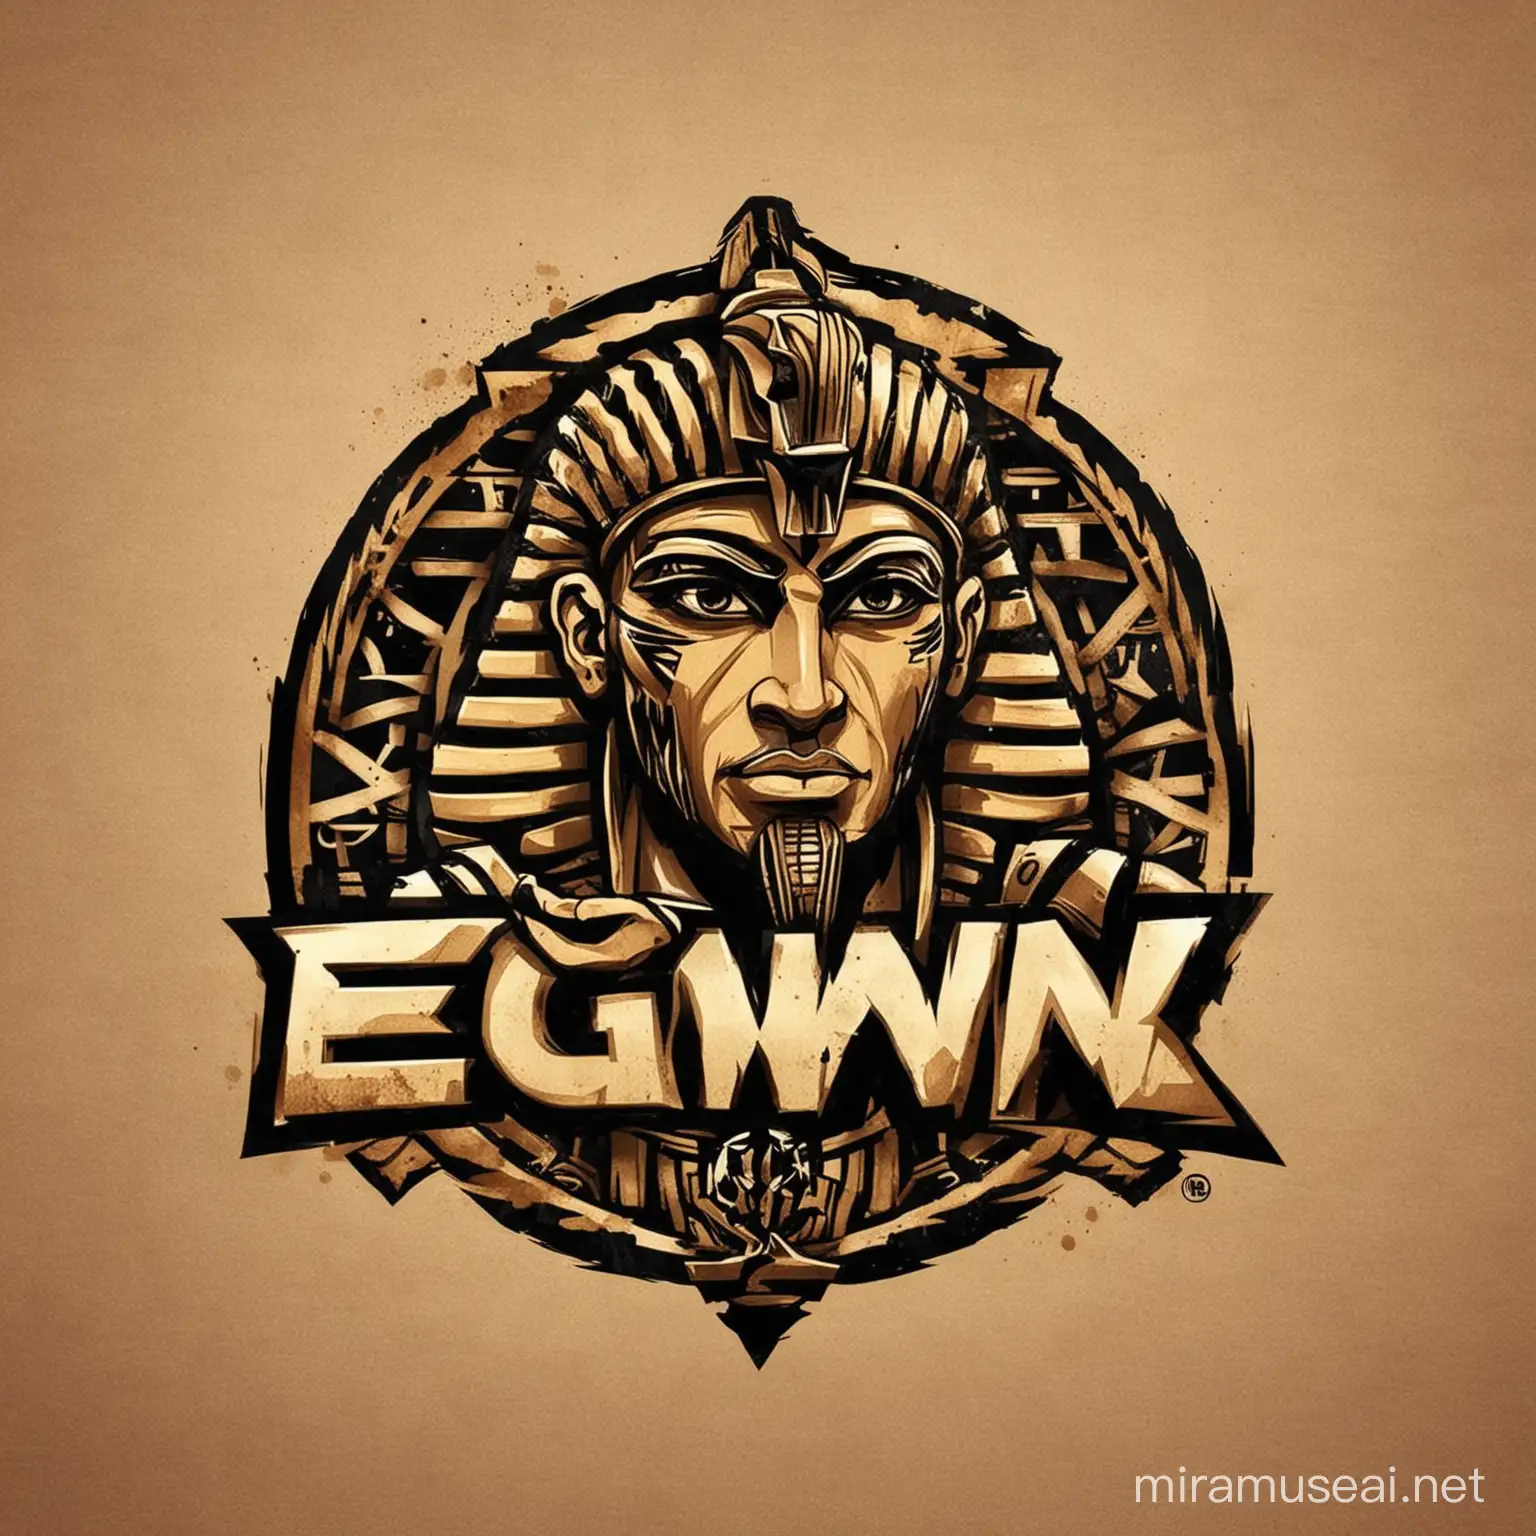 EGW Egyptian Pro Wrestling Company Logo Featuring Sphinx and Pyramids